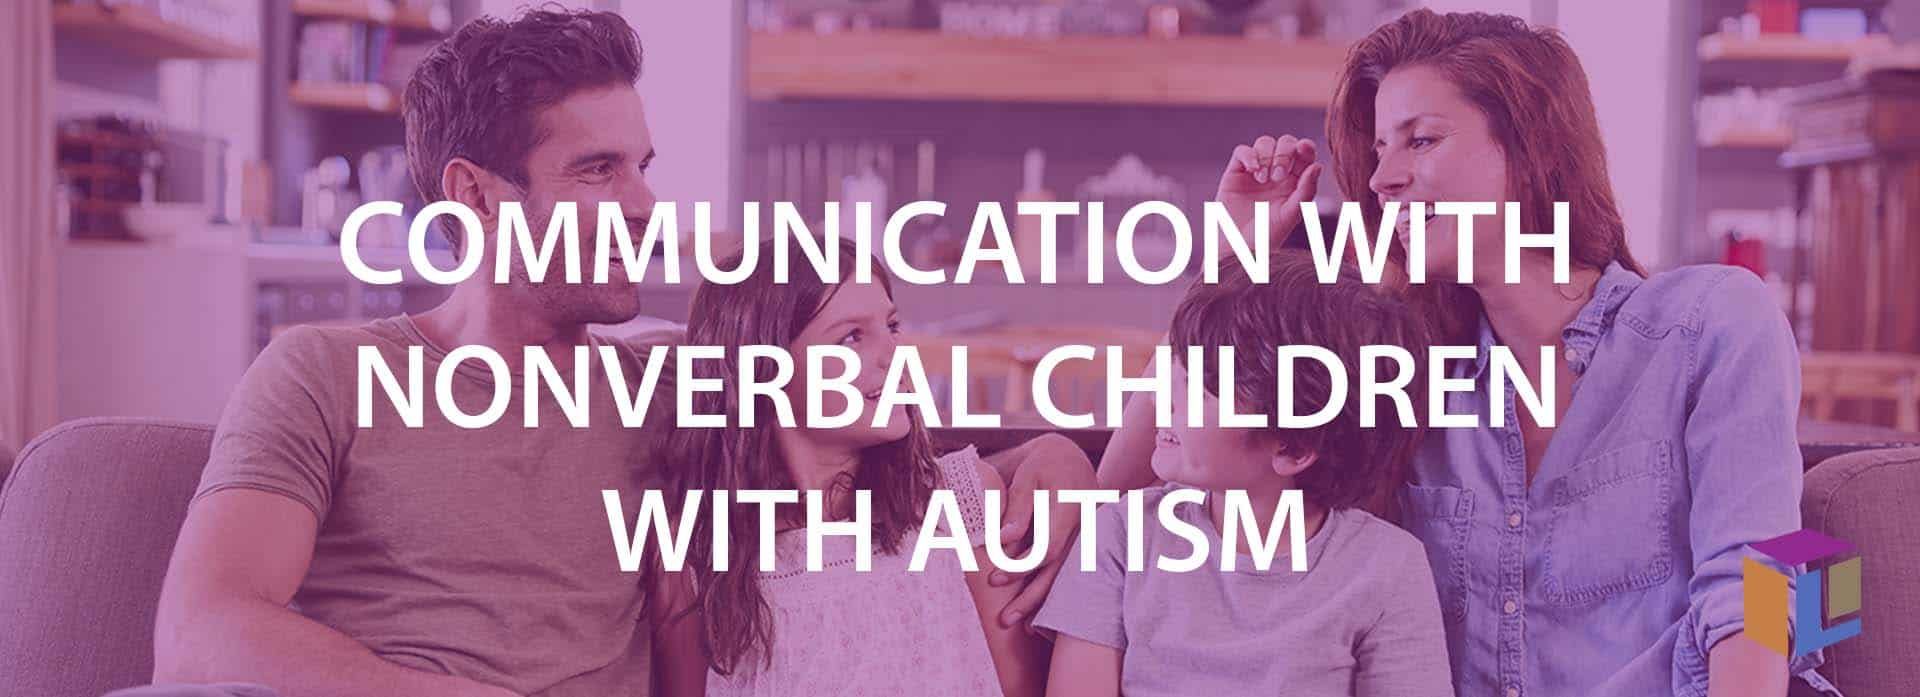 Communication With Nonverbal Children With Autism Communication With Nonverbal Children With Autism Communication With Nonverbal Children With Autism Communication With Nonverbal Children With Autism